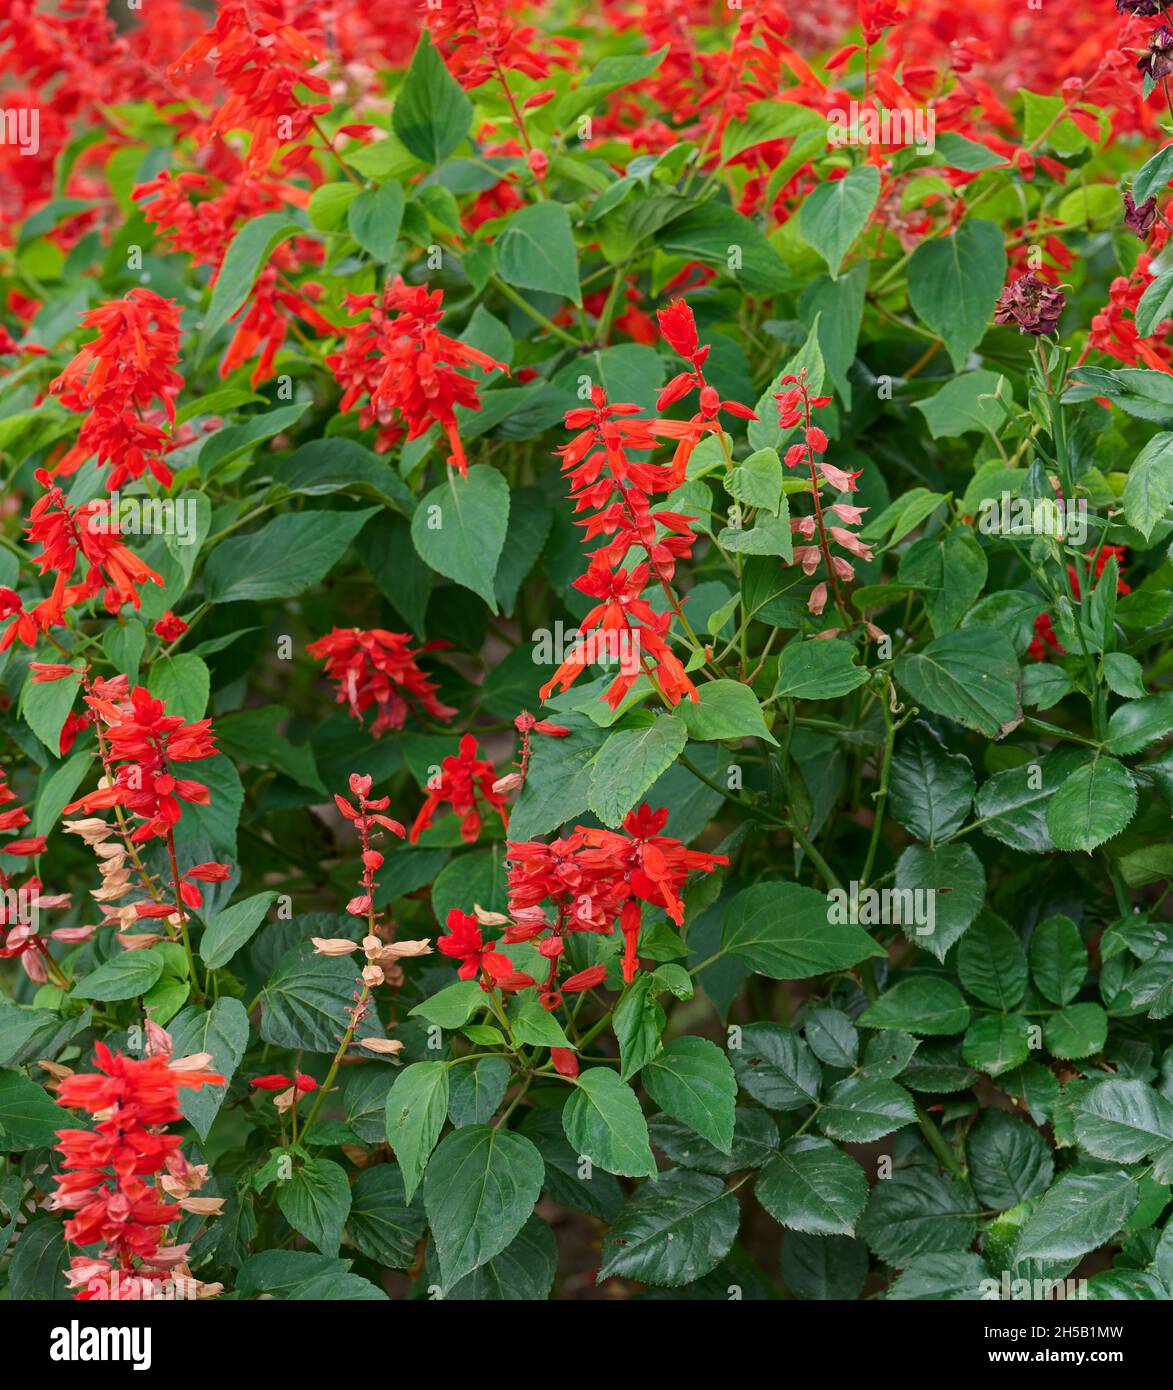 Salvia divinorum, garden with blooming red flowers and green leaves. Day Stock Photo